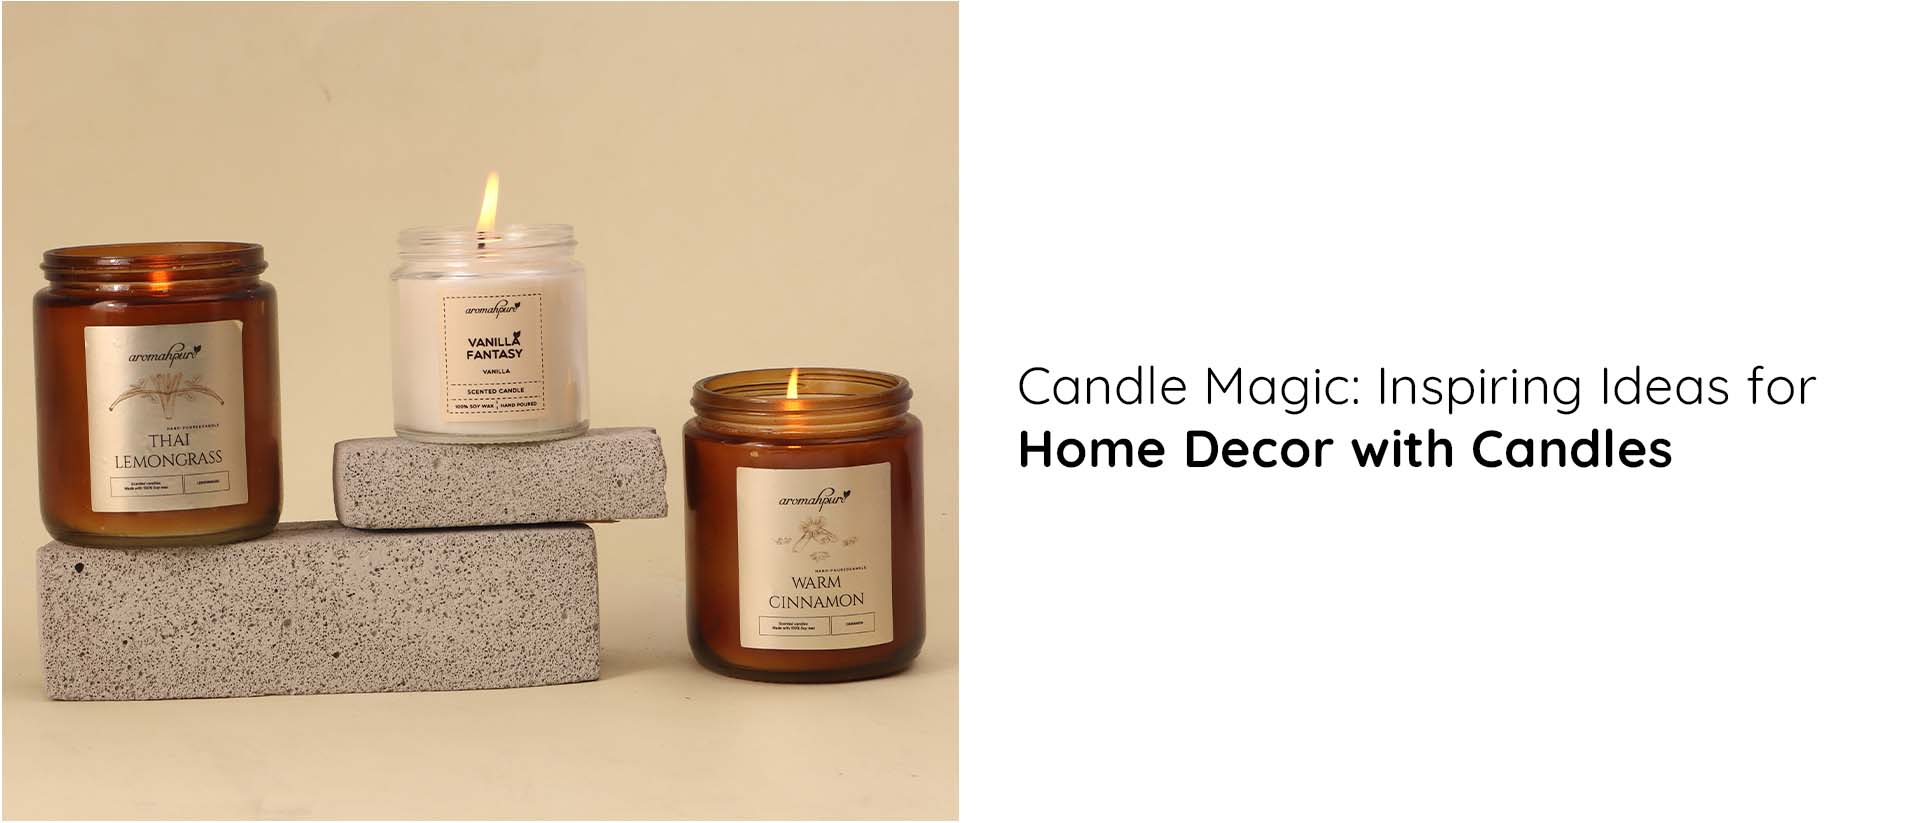 Candle Magic: Inspiring Ideas for Home Decor with Candles